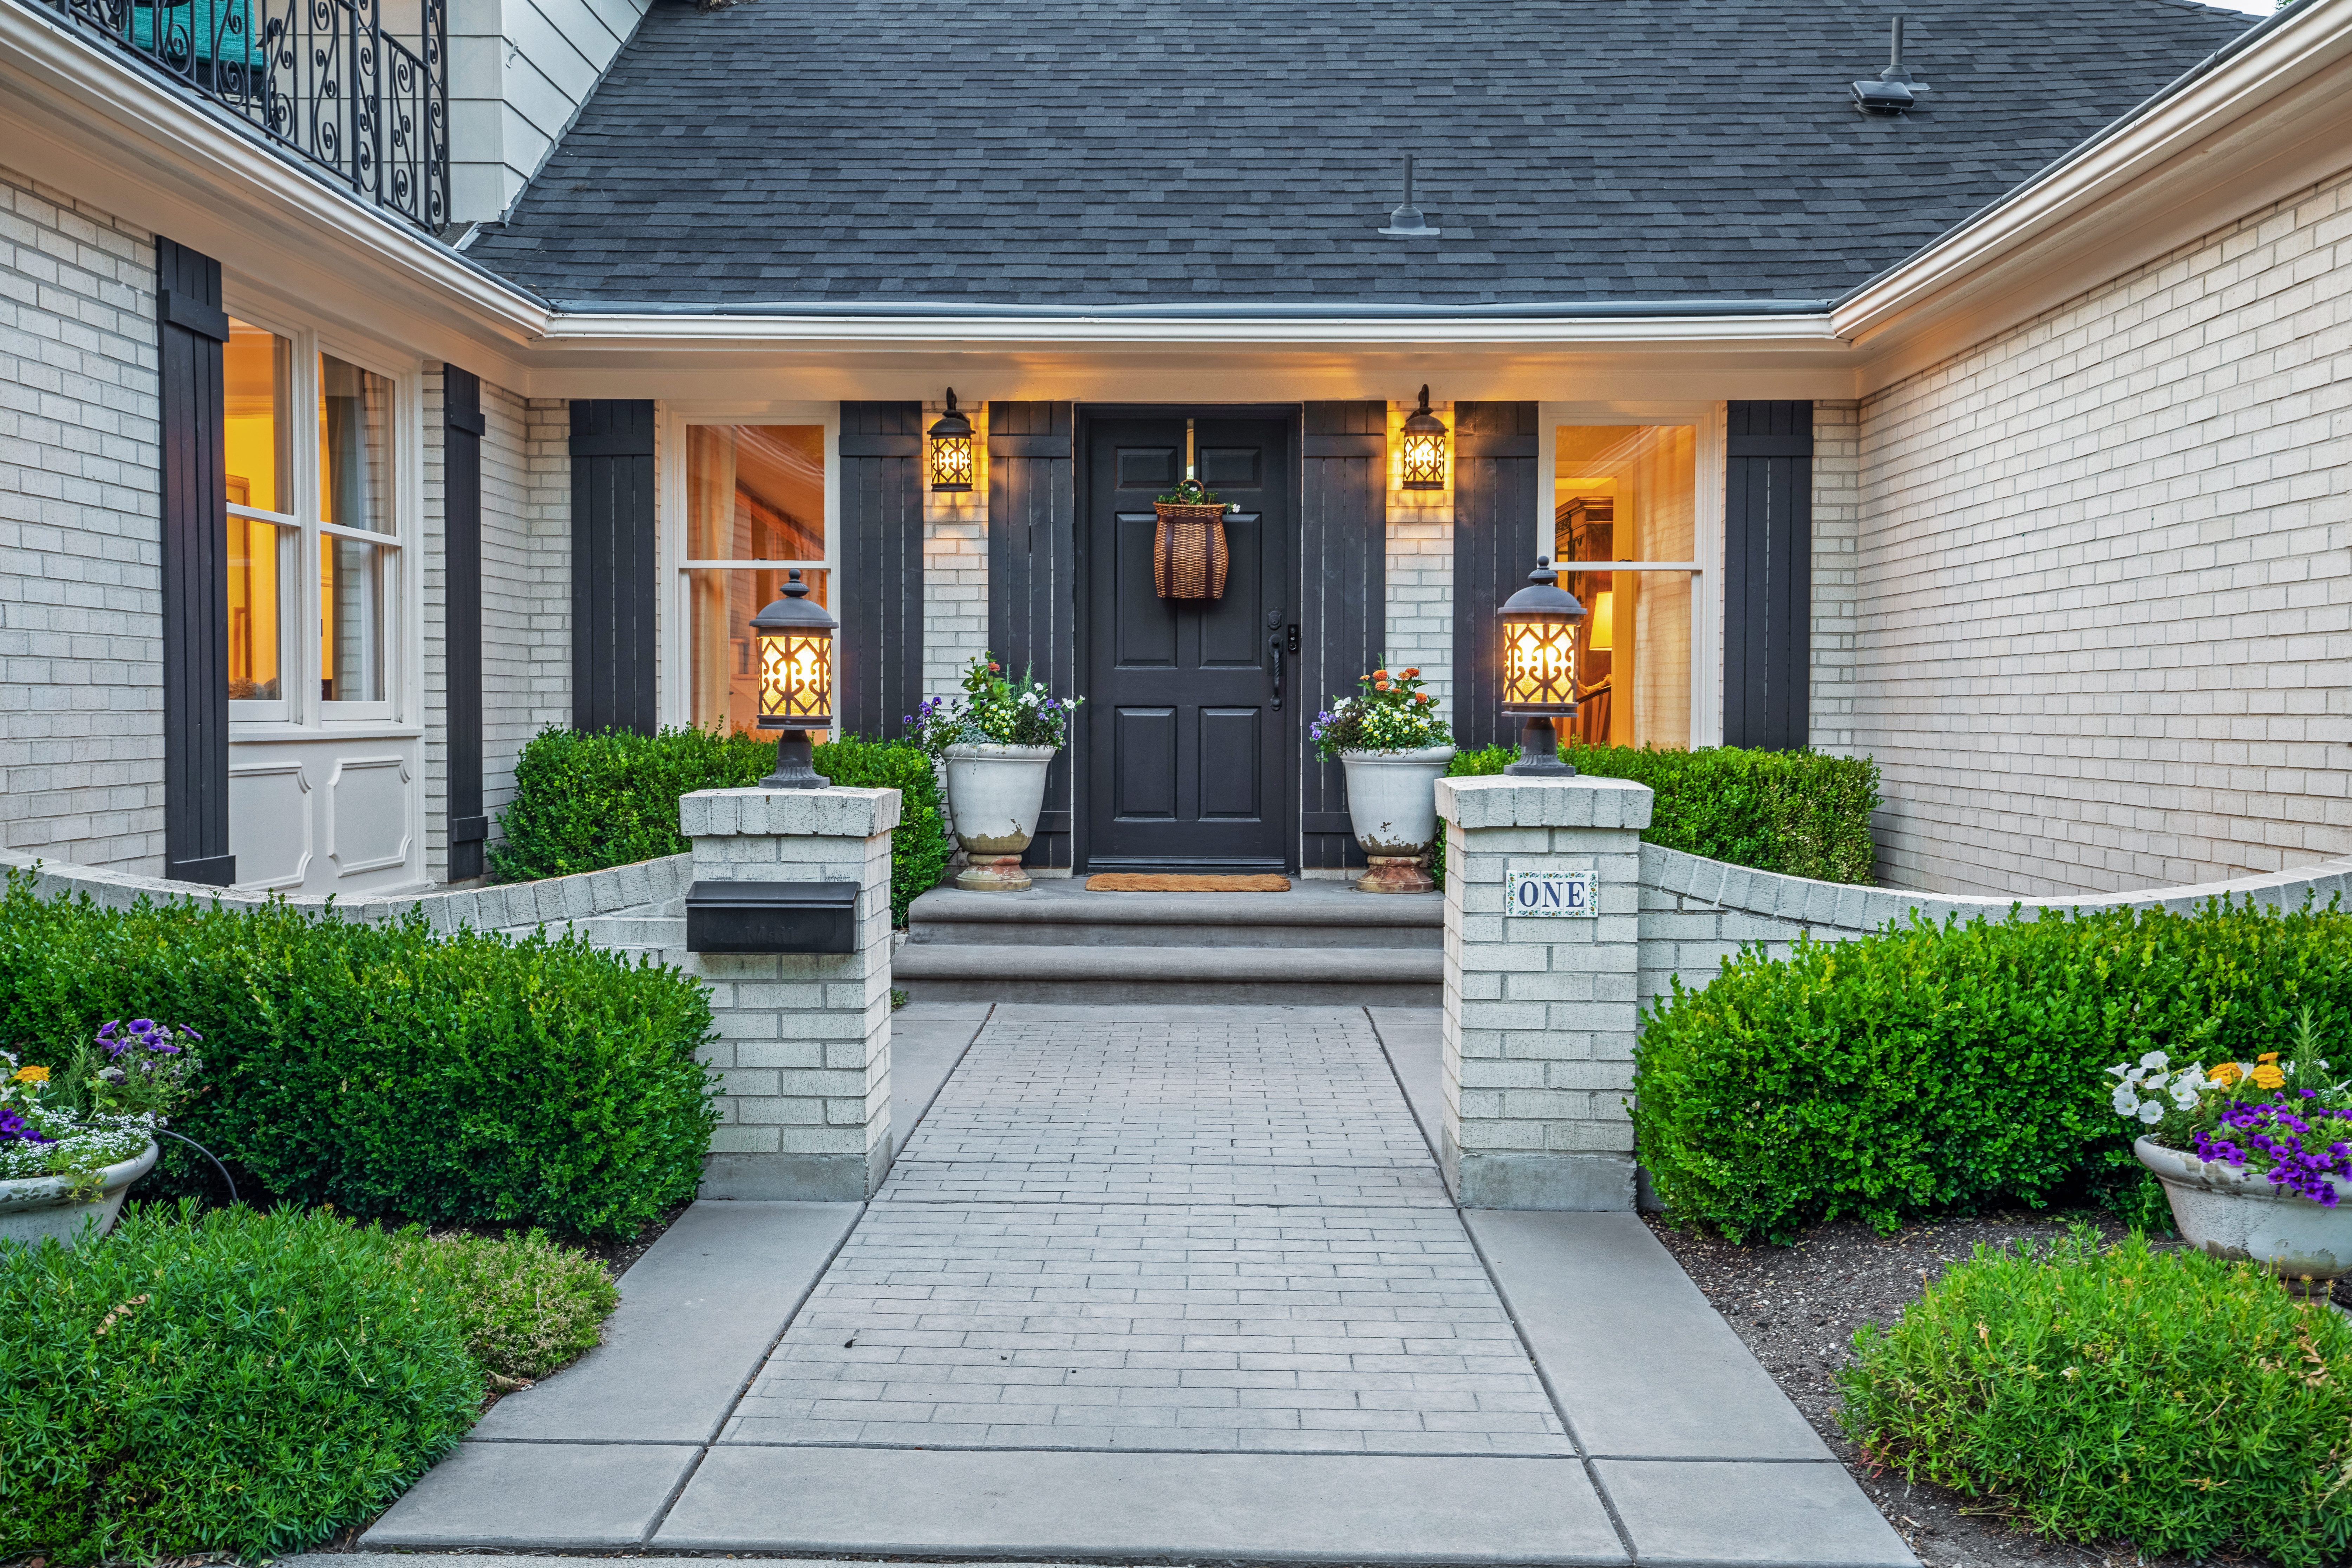 Inviting home entrance at dusk with warm porch lights, manicured bushes, and welcoming potted plants on either side of a dark wood door.